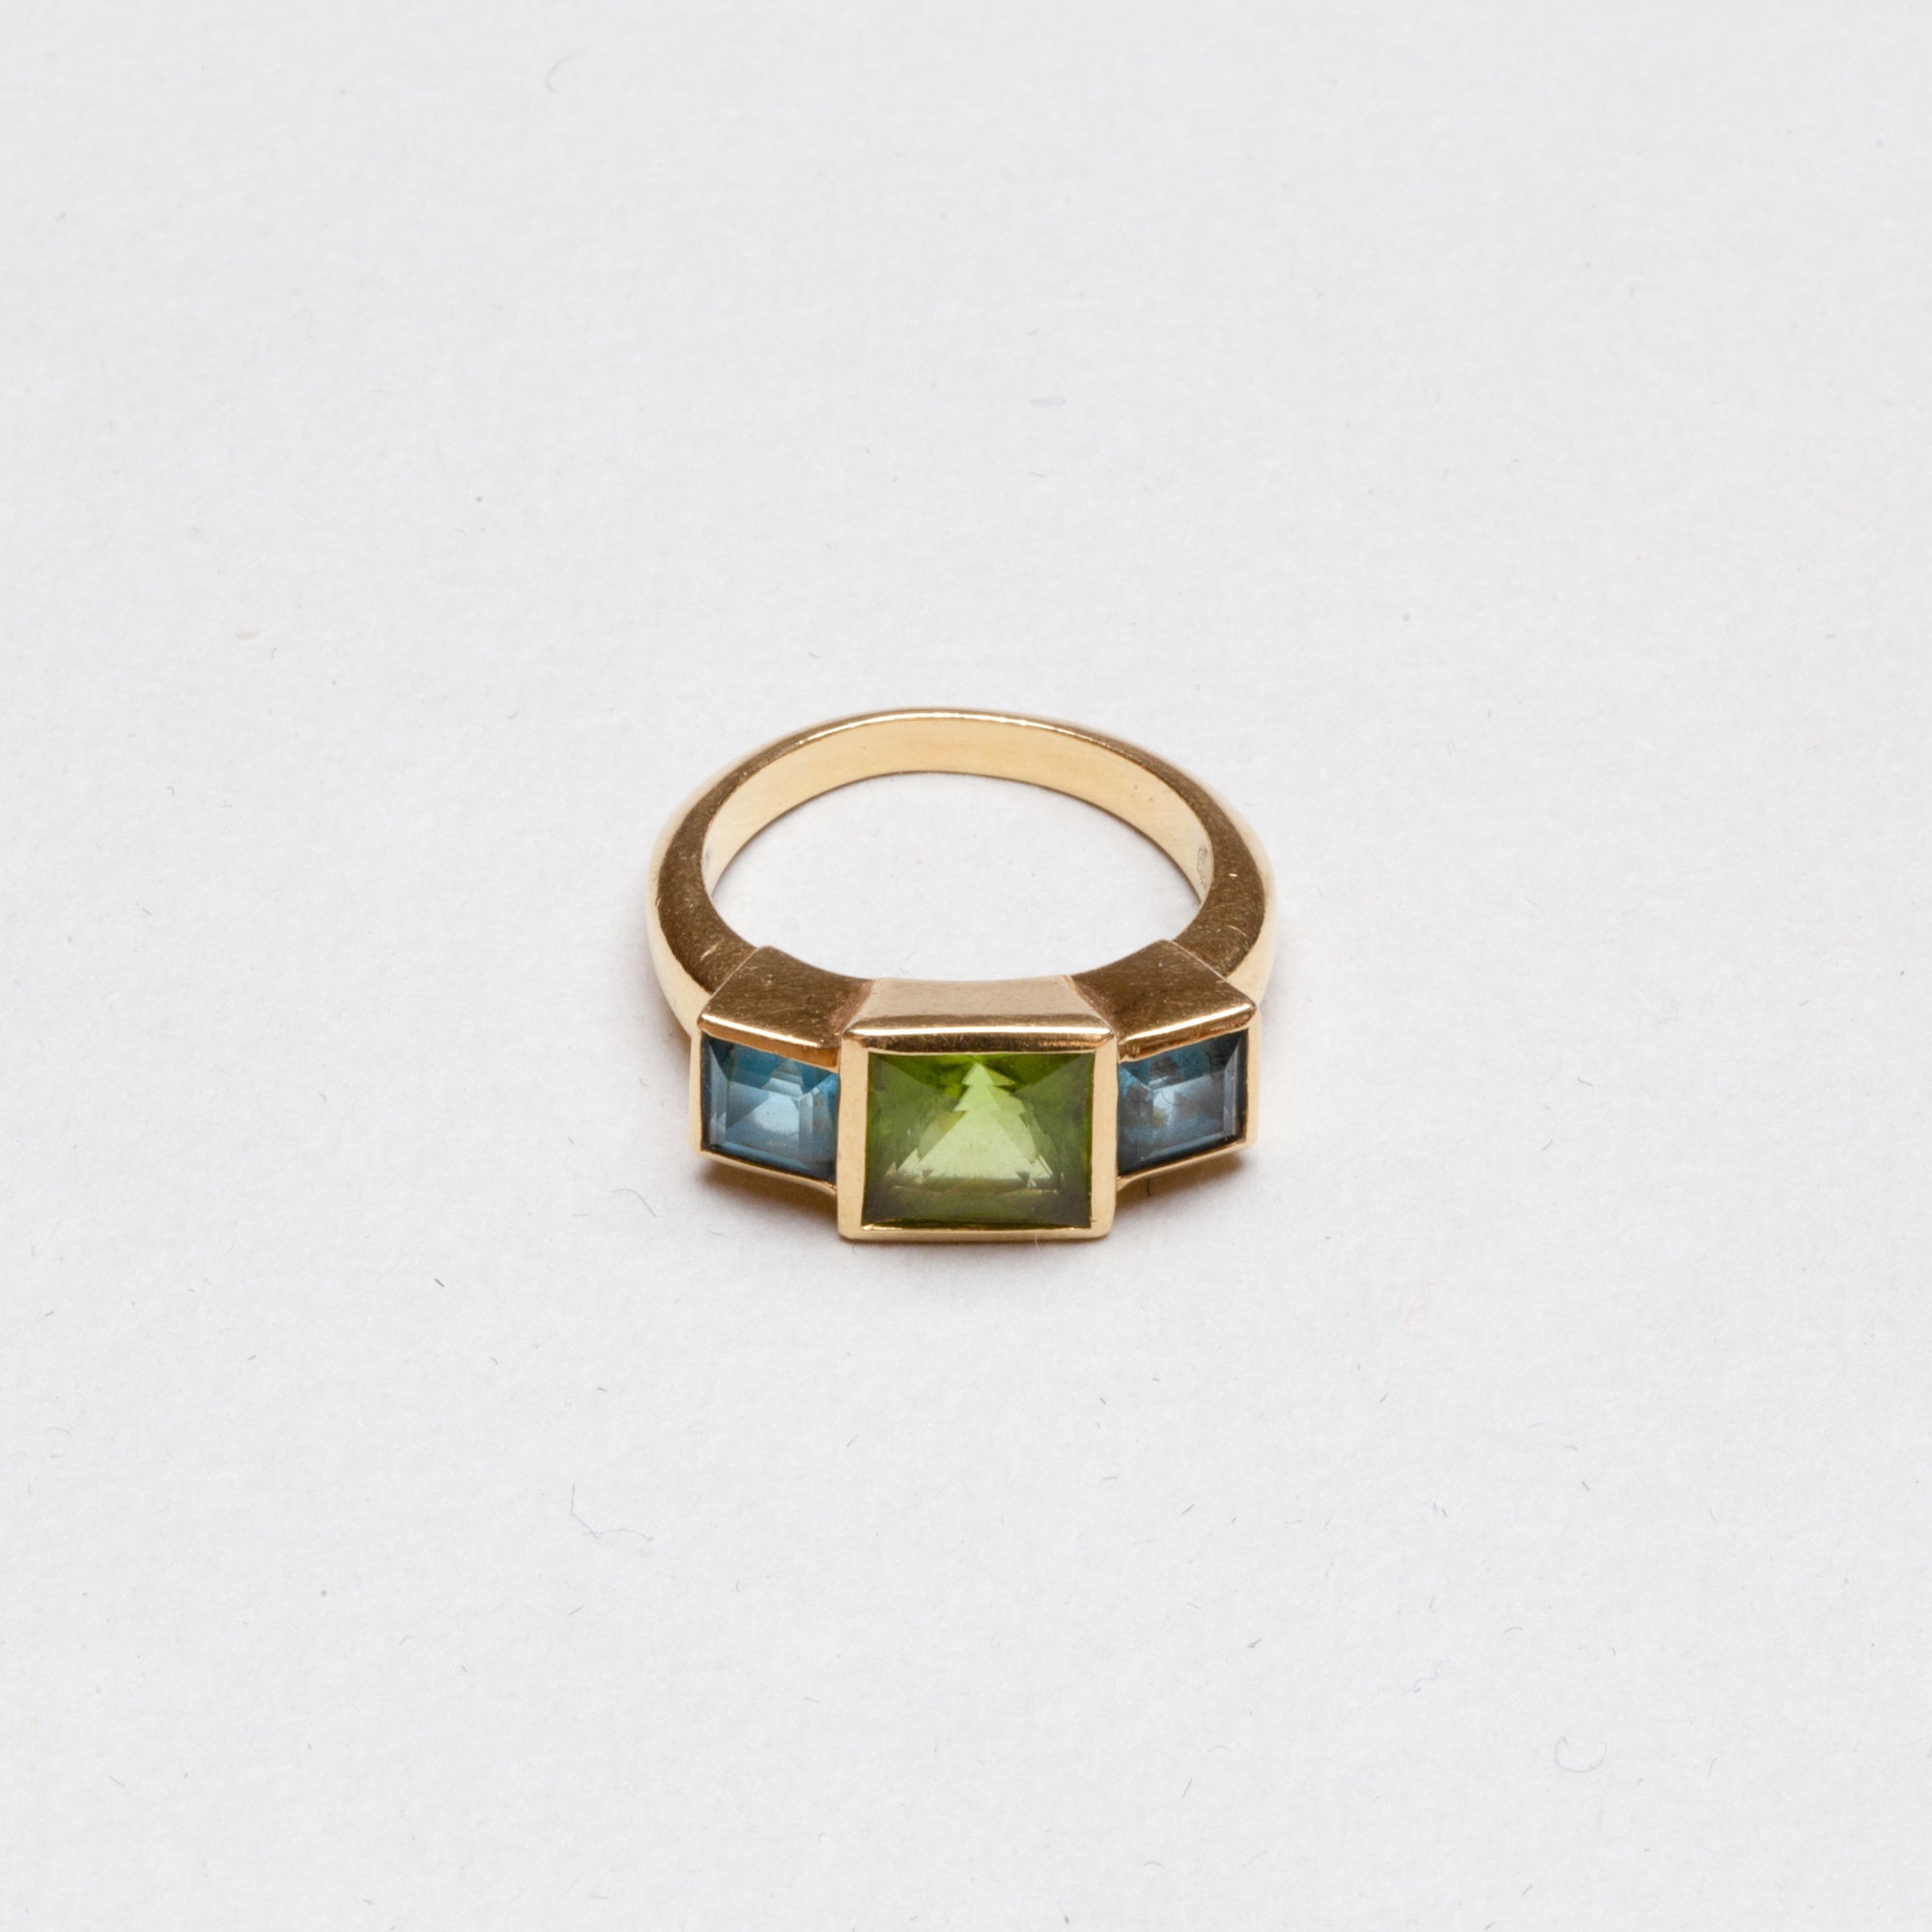 Vintage 18ct Gold Ring with Peridot and Blue Topaz